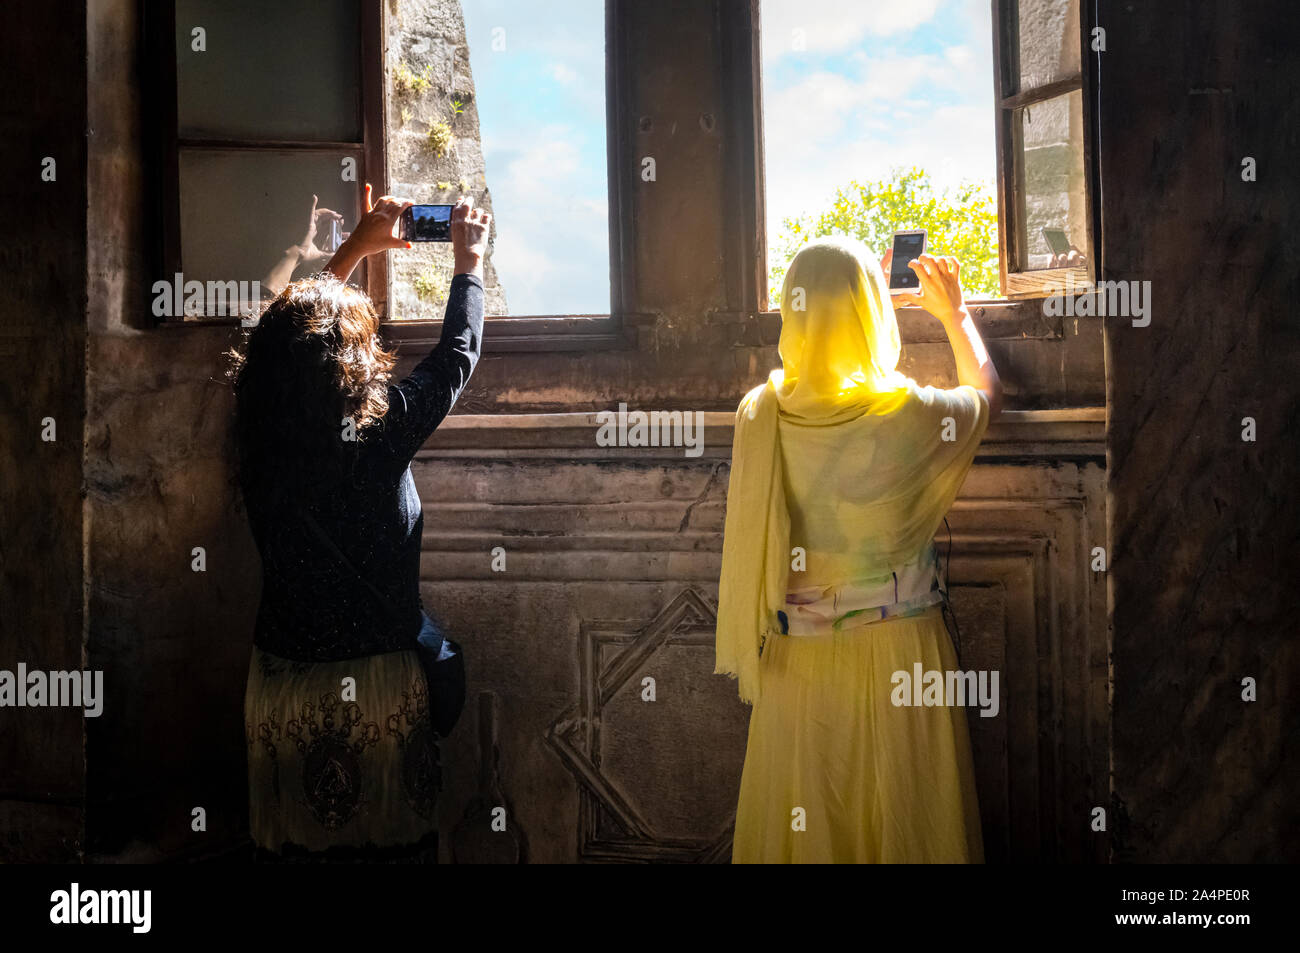 A muslim woman with traditional burqa abaya and a non-muslim woman take cell phone photographs out a window in the Hagia Sophia in Istanbul, Turkey Stock Photo